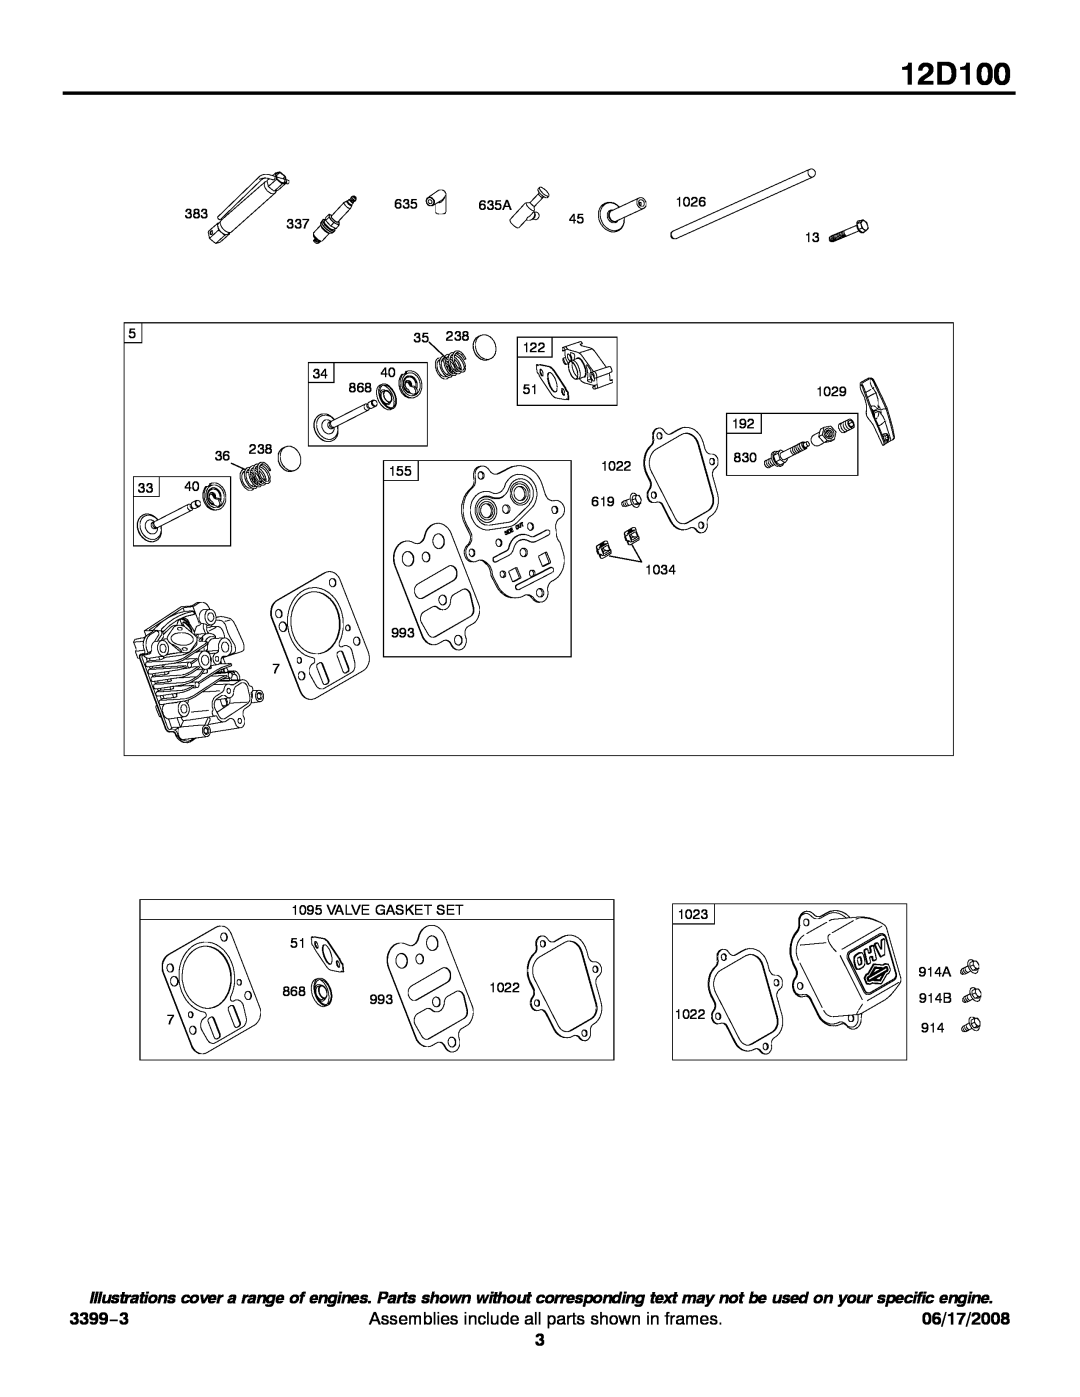 Snapper 12D100 service manual 3399−3, Assemblies include all parts shown in frames, 06/17/2008, 914A 